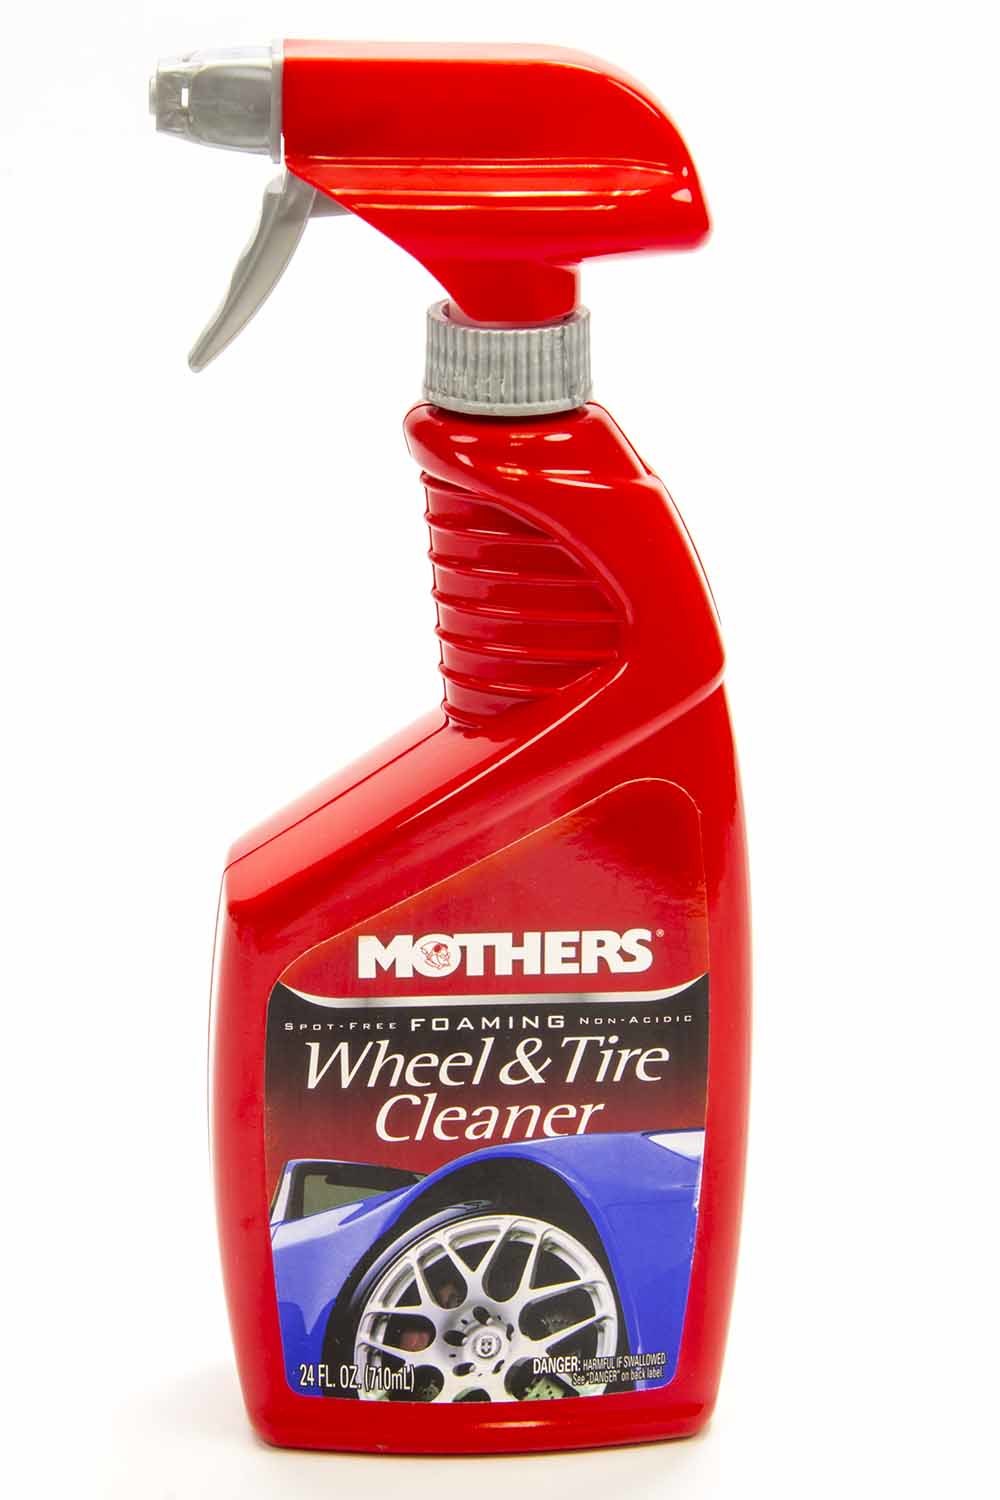 MOTHERS Wheel Cleaner, Wheel And Tire Cleaner, 24 oz Spray Bottle, Each